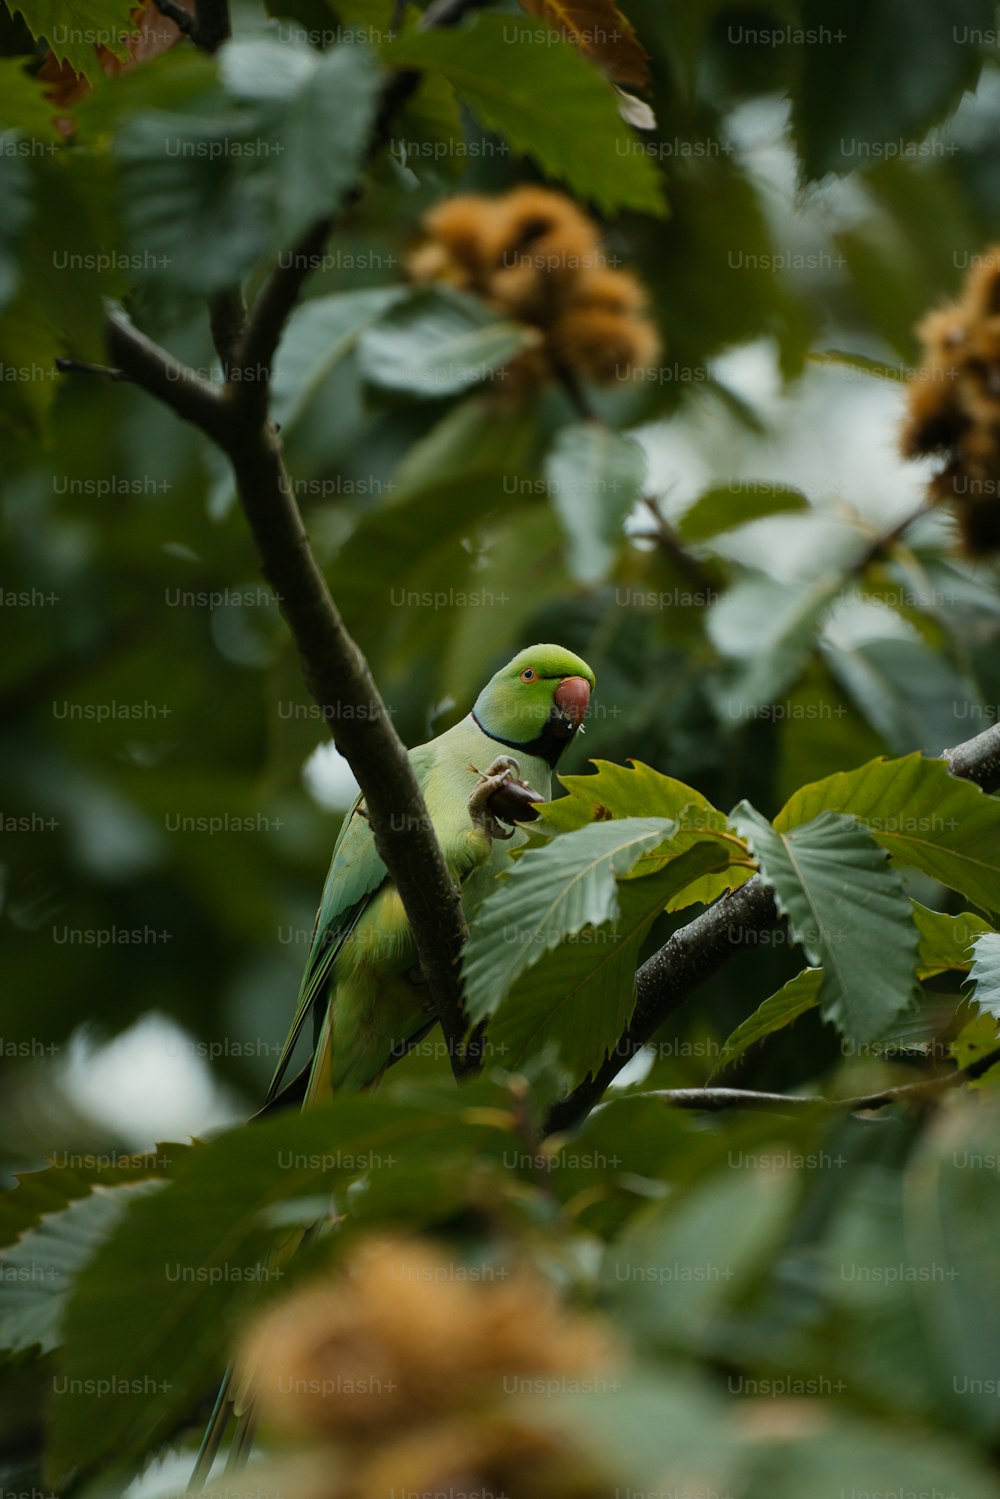 a green bird perched on a tree branch